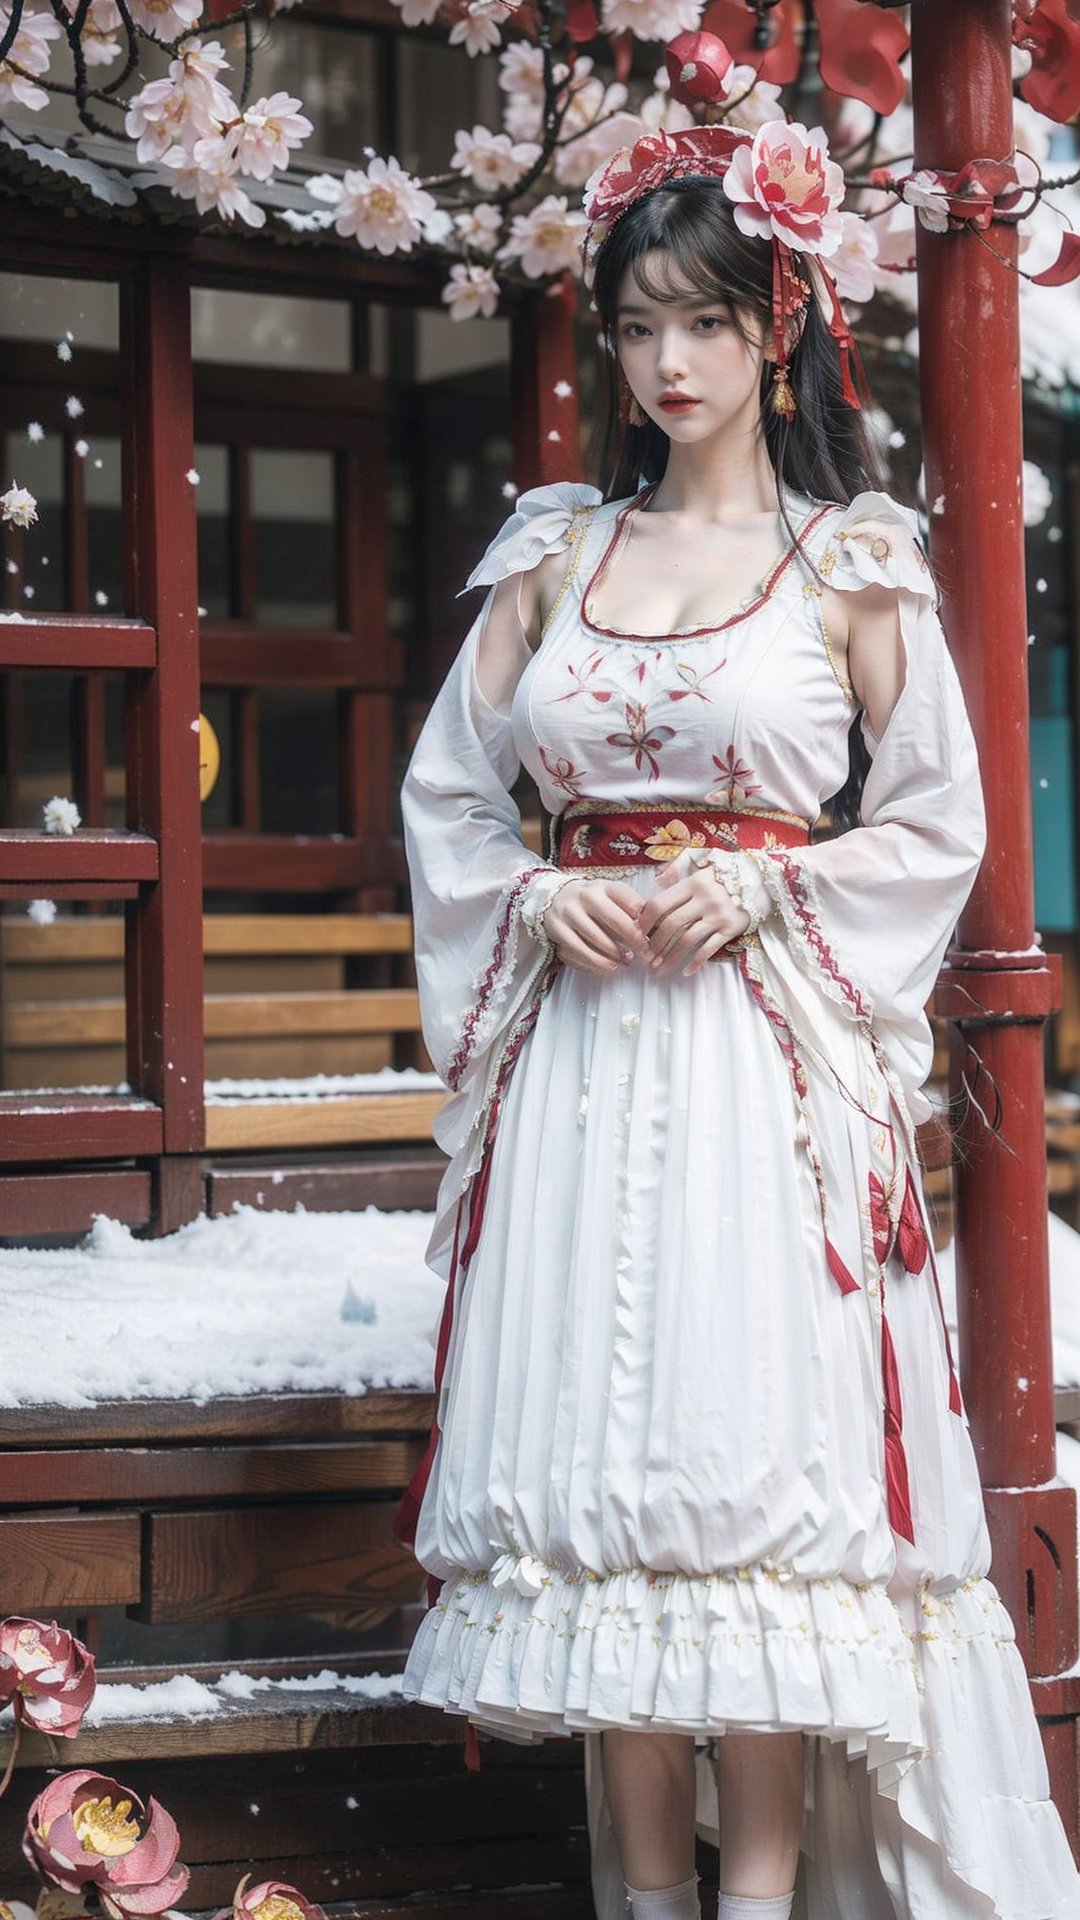 hanfu, Best Quality, masterpiece, (Snowing:1.3),1 girl, (long hair:1.2),  (big breasts:1.89),(Upper body photo:1.3),hanfu,18-year-old , exquisite , extreme face,creamy skin, fair skin,realistic skin details, (super-detail) , long hair, (big breasts:1.69),1girl,long skirt,long sleeves,(Peony flowers, plum blossoms:1.5),(flower:1.3),tangdynastyhanfu, hanfu2,myhanfu, chang,Sit on the steps, hands on hips,embroidered flower patterns,hanfulolita,Chinese style, Huge flowers